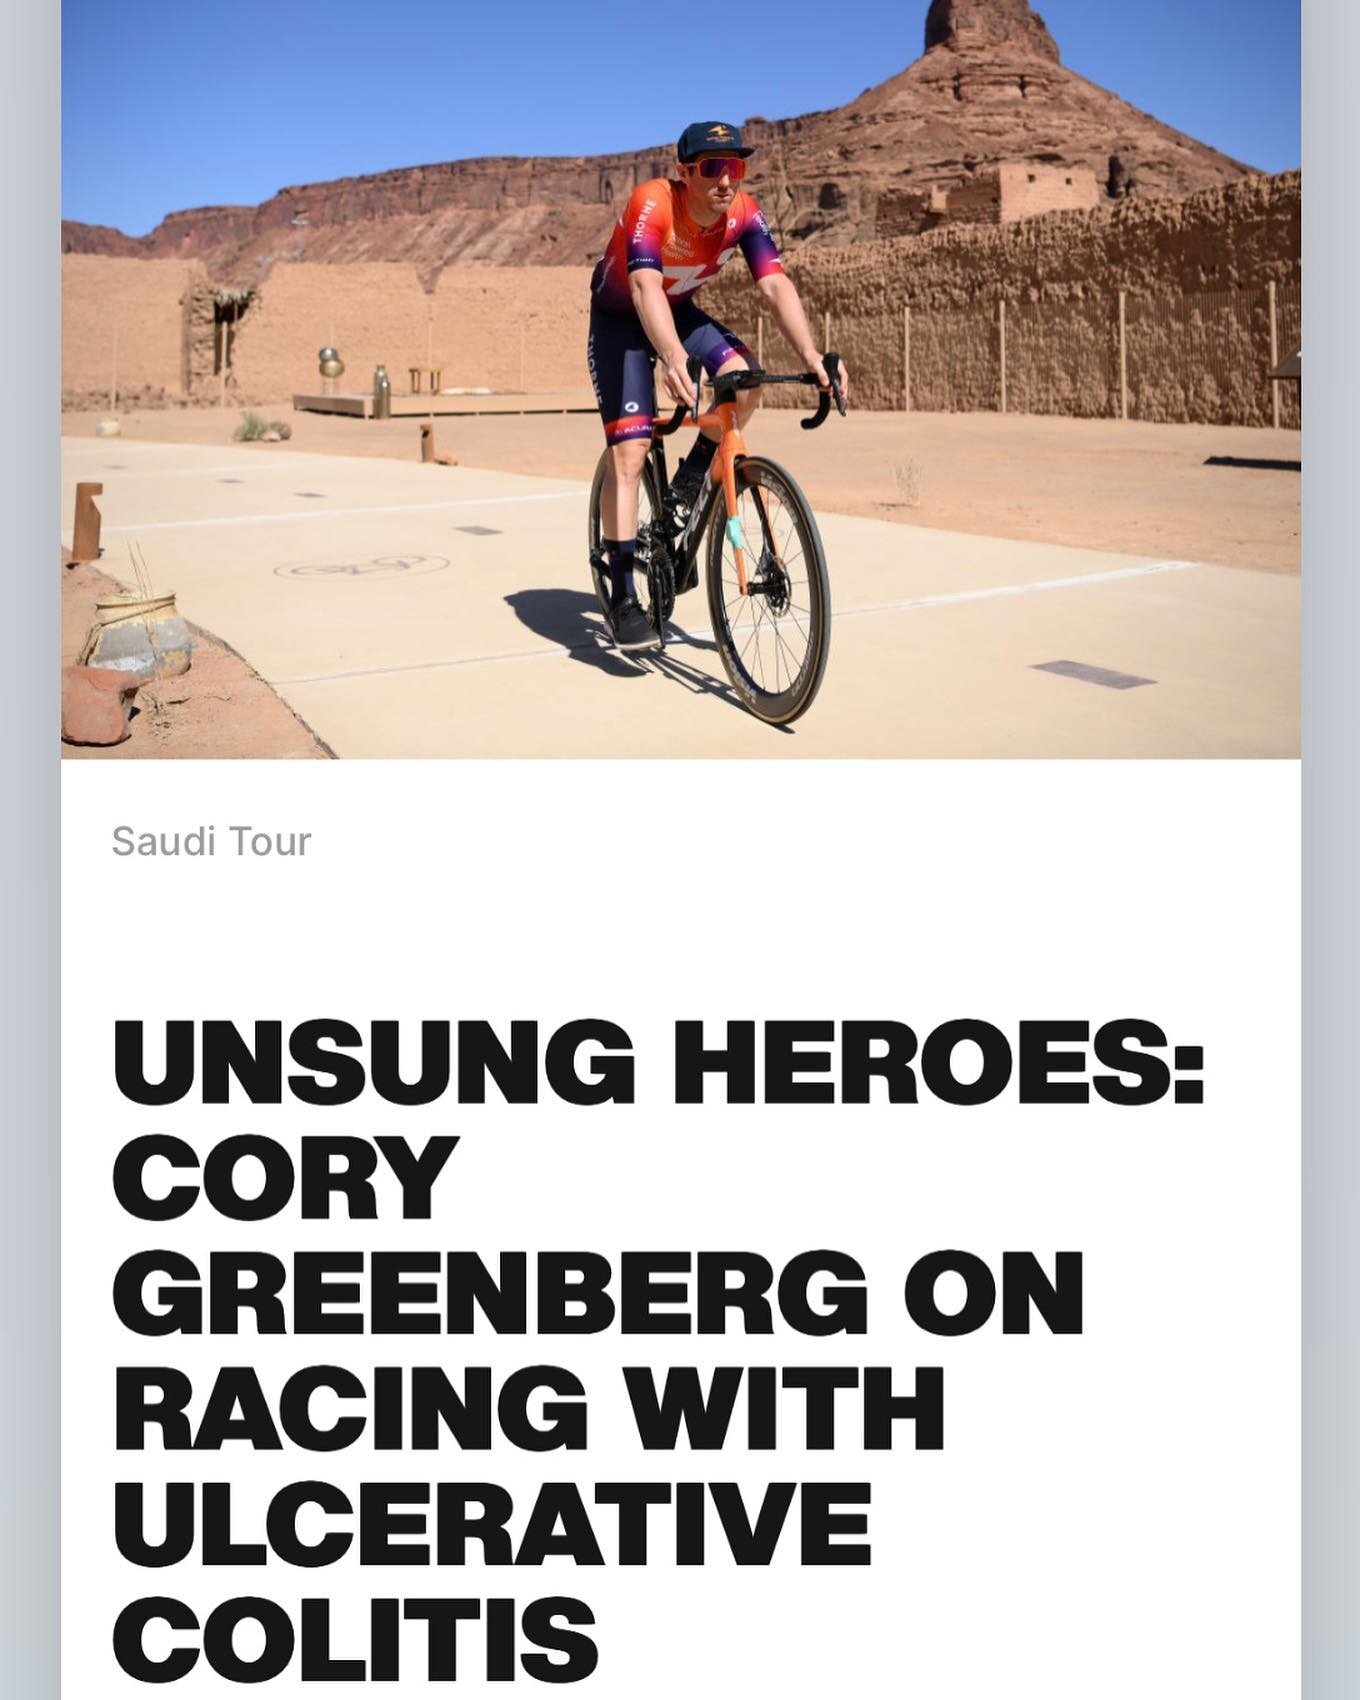 Ride4ibd makes it to @cyclingtips !! Read all about @corymike23 #ibd journey and his new team @hphcycling . Cory recently competed in Saudi Arabia, racing this years Saudi Tour . 

That&rsquo;s how we #Ride4IBD !!! 

Link to article in our bio 🔗 

#